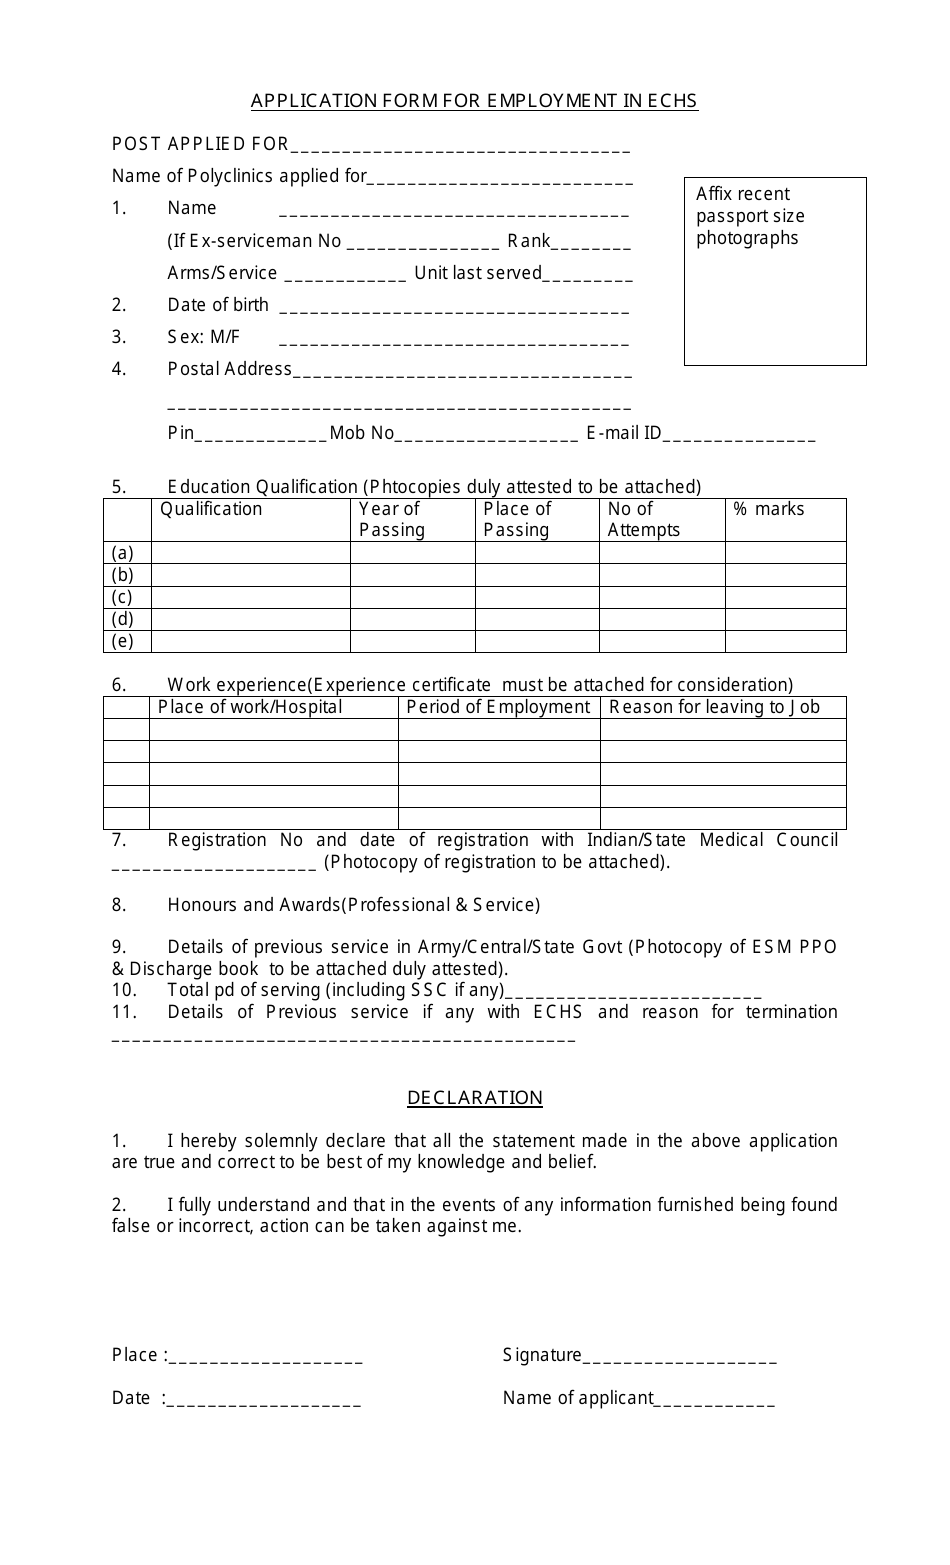 Application Form for Employment in Echs - India, Page 1